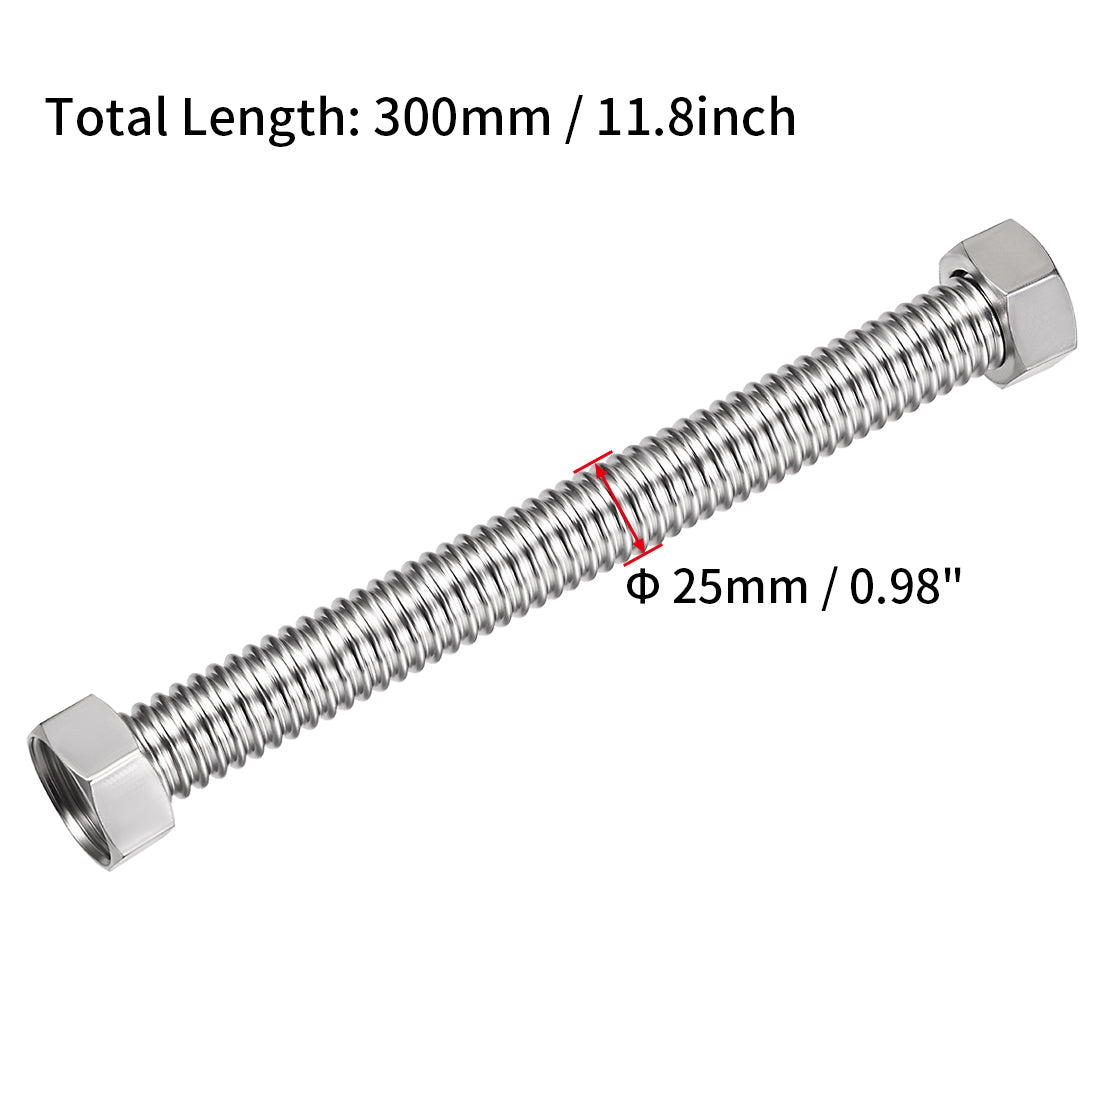 uxcell Uxcell Corrugated Stainless Steel Flexible Water Line 11.8inch Long G1 Female Threaded Connector with Washer